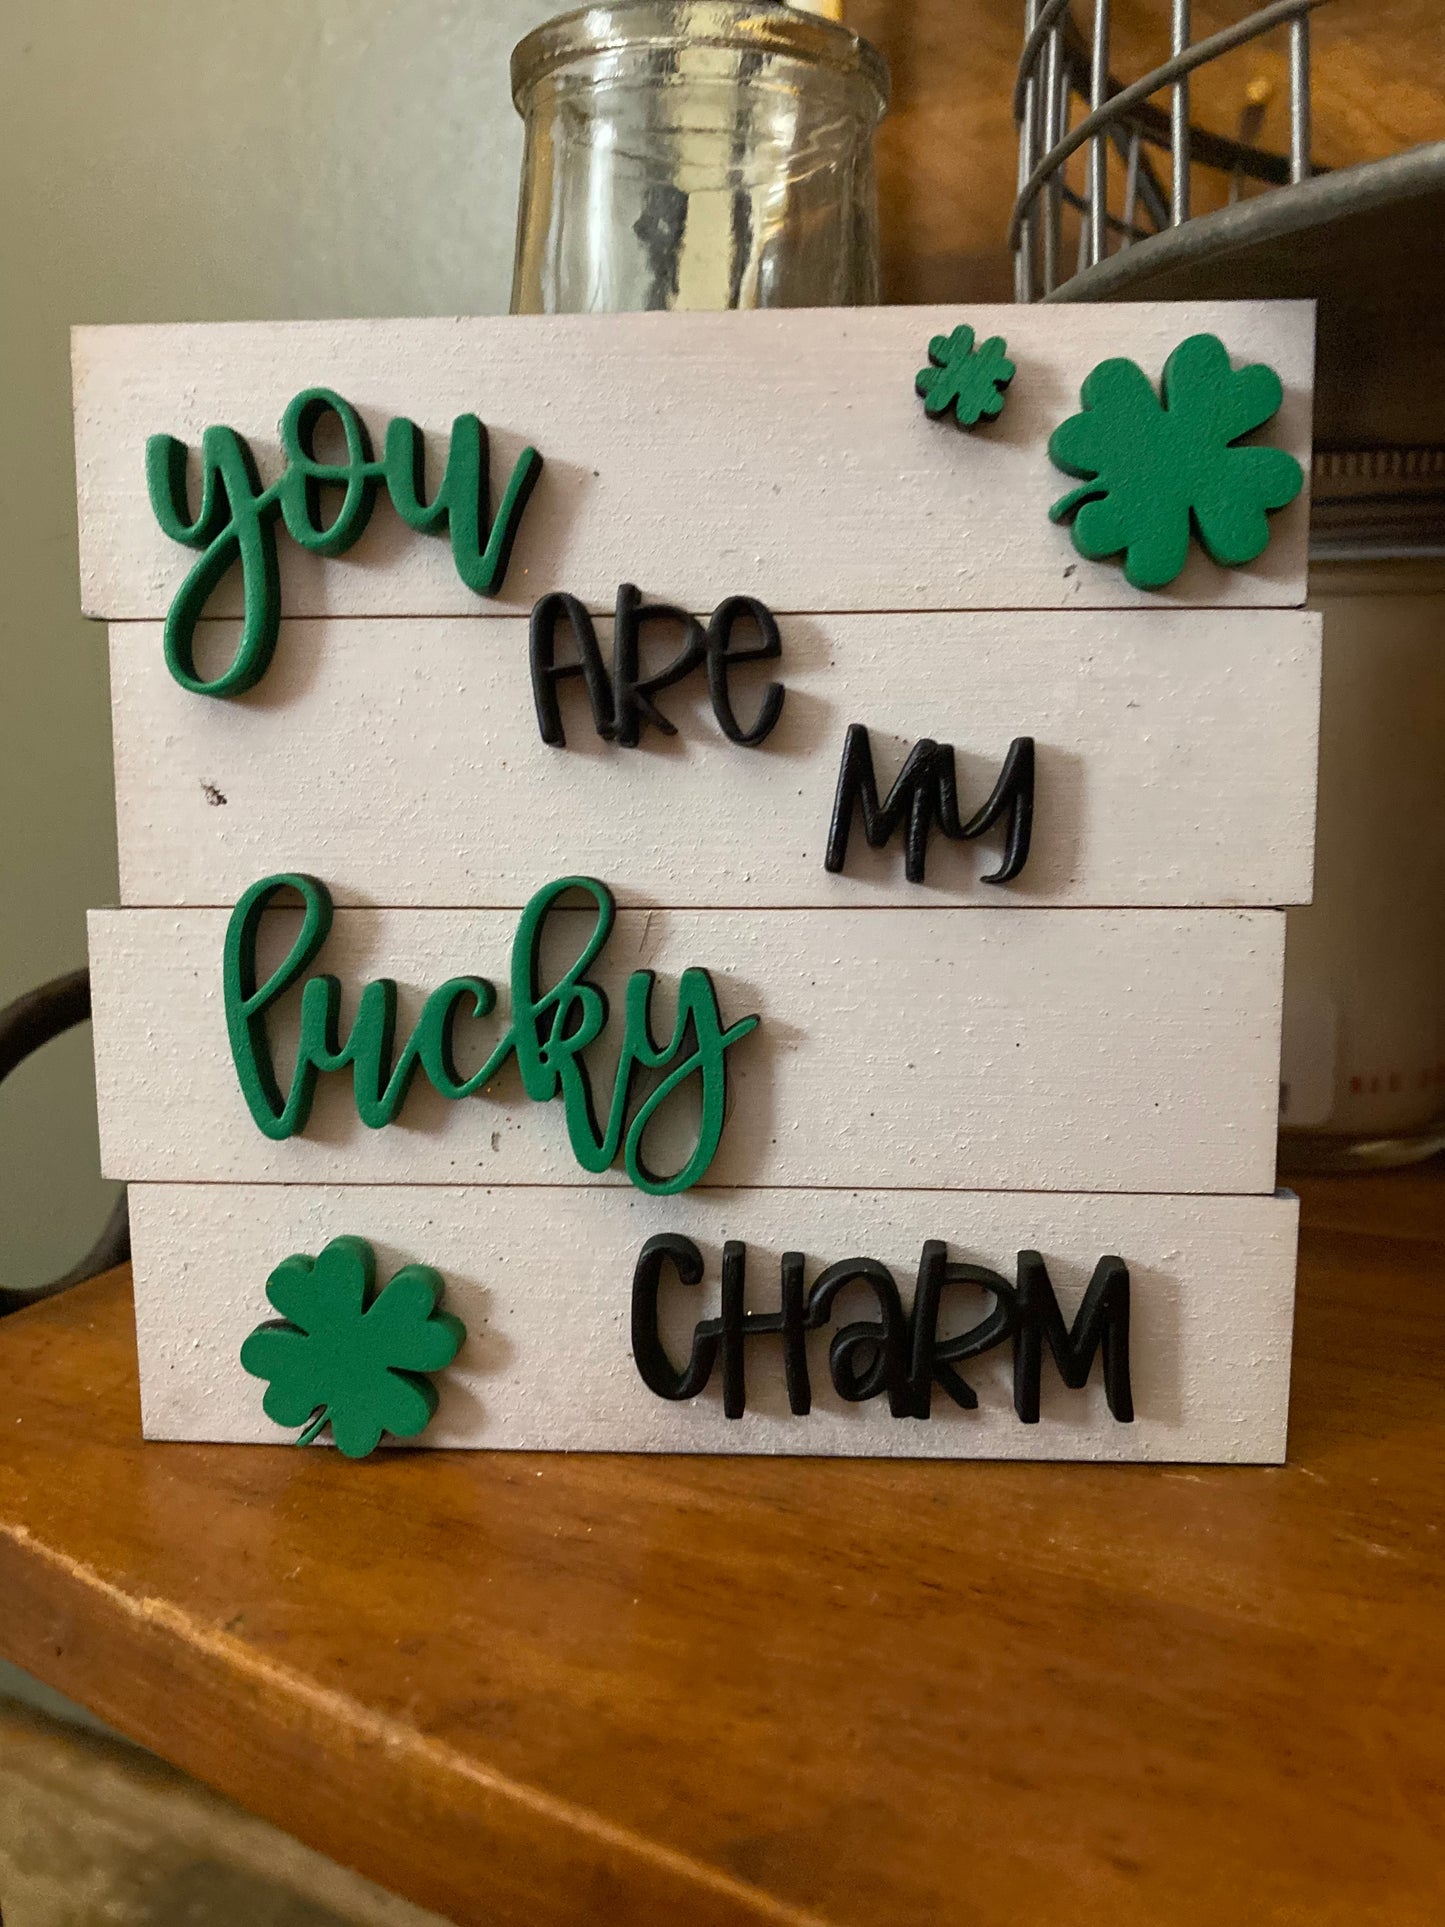 St. Patrick's Day Tiered Tray Kit